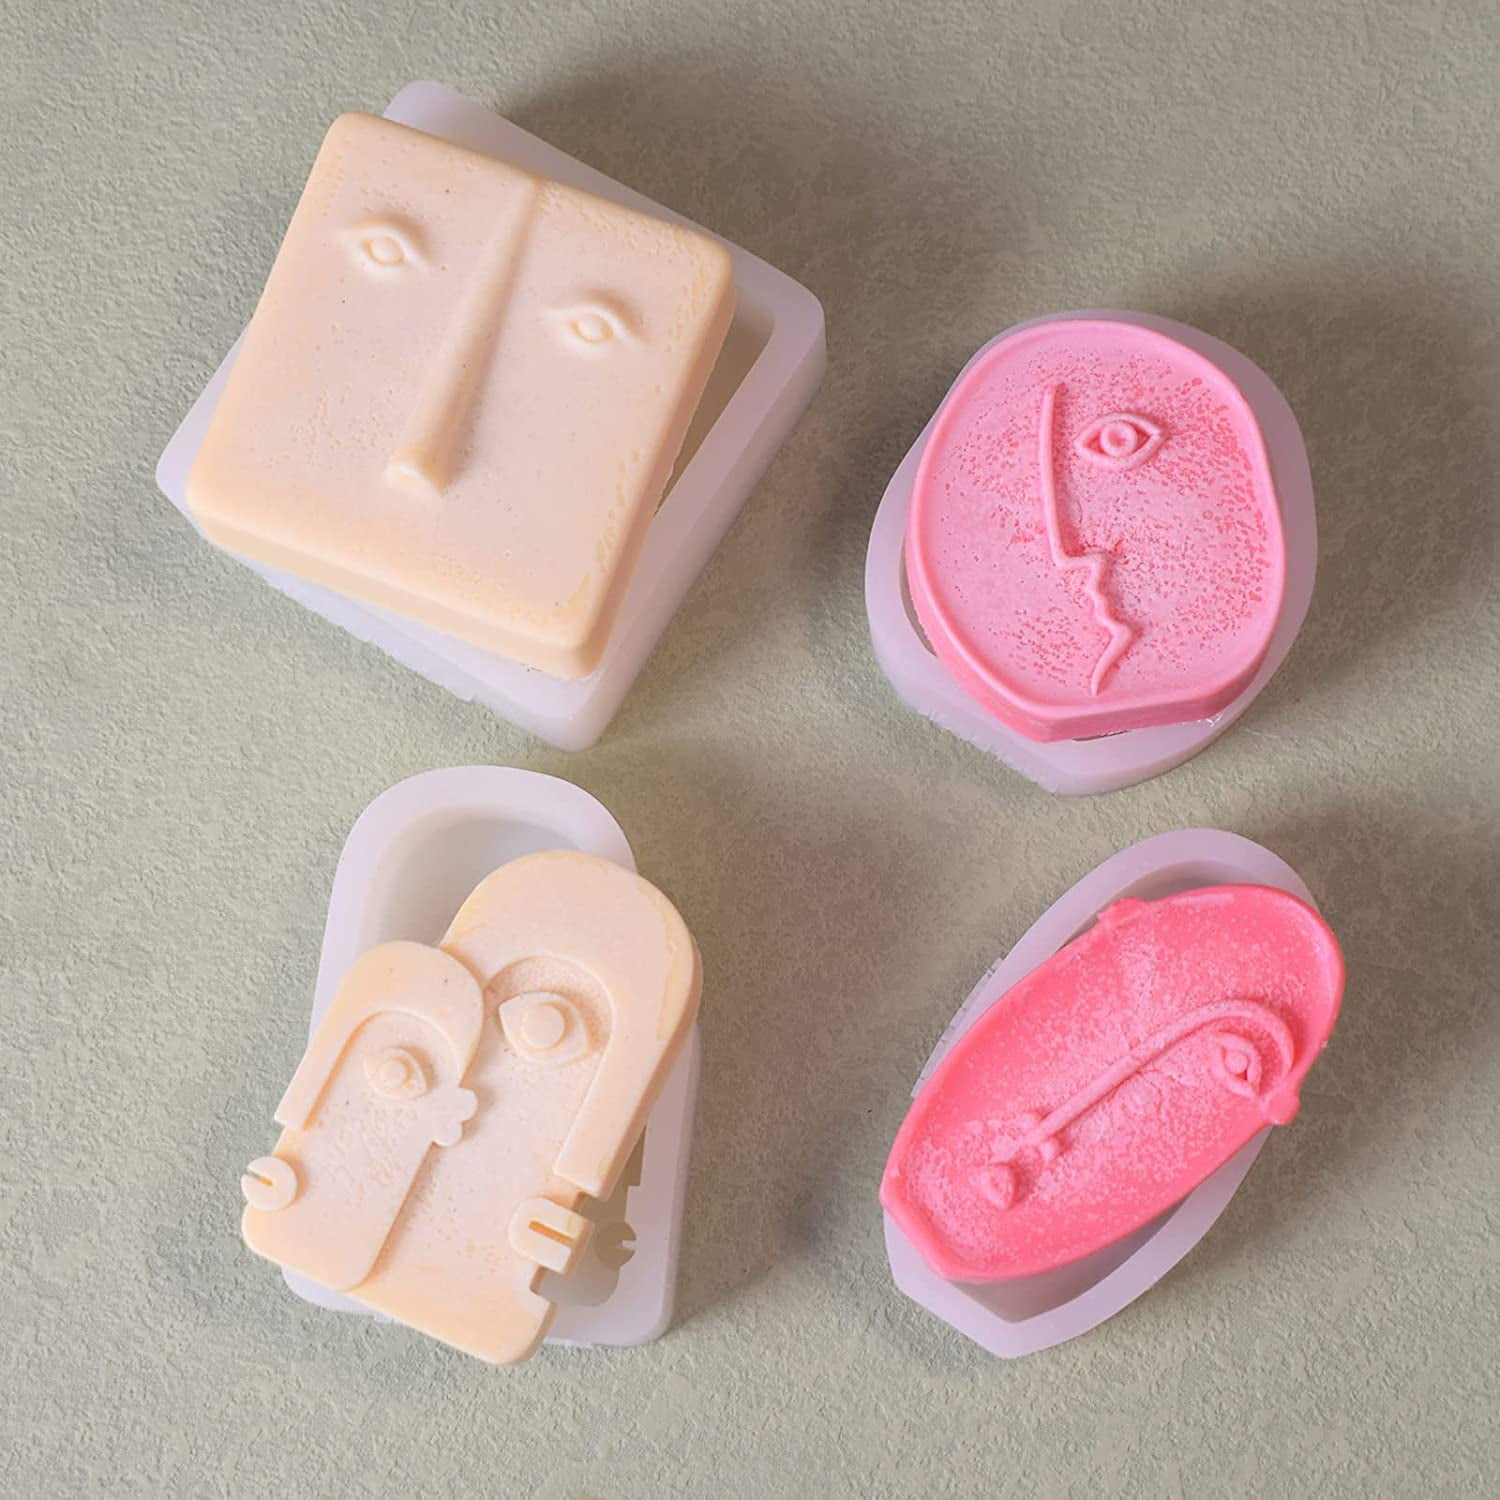 Travelwant 3D Body Art Candle Silicone Mold Women Body Candle Moulds for Resin Casting Body Stand Ornaments Mold Epoxy Human Mold Homemade Soap Making